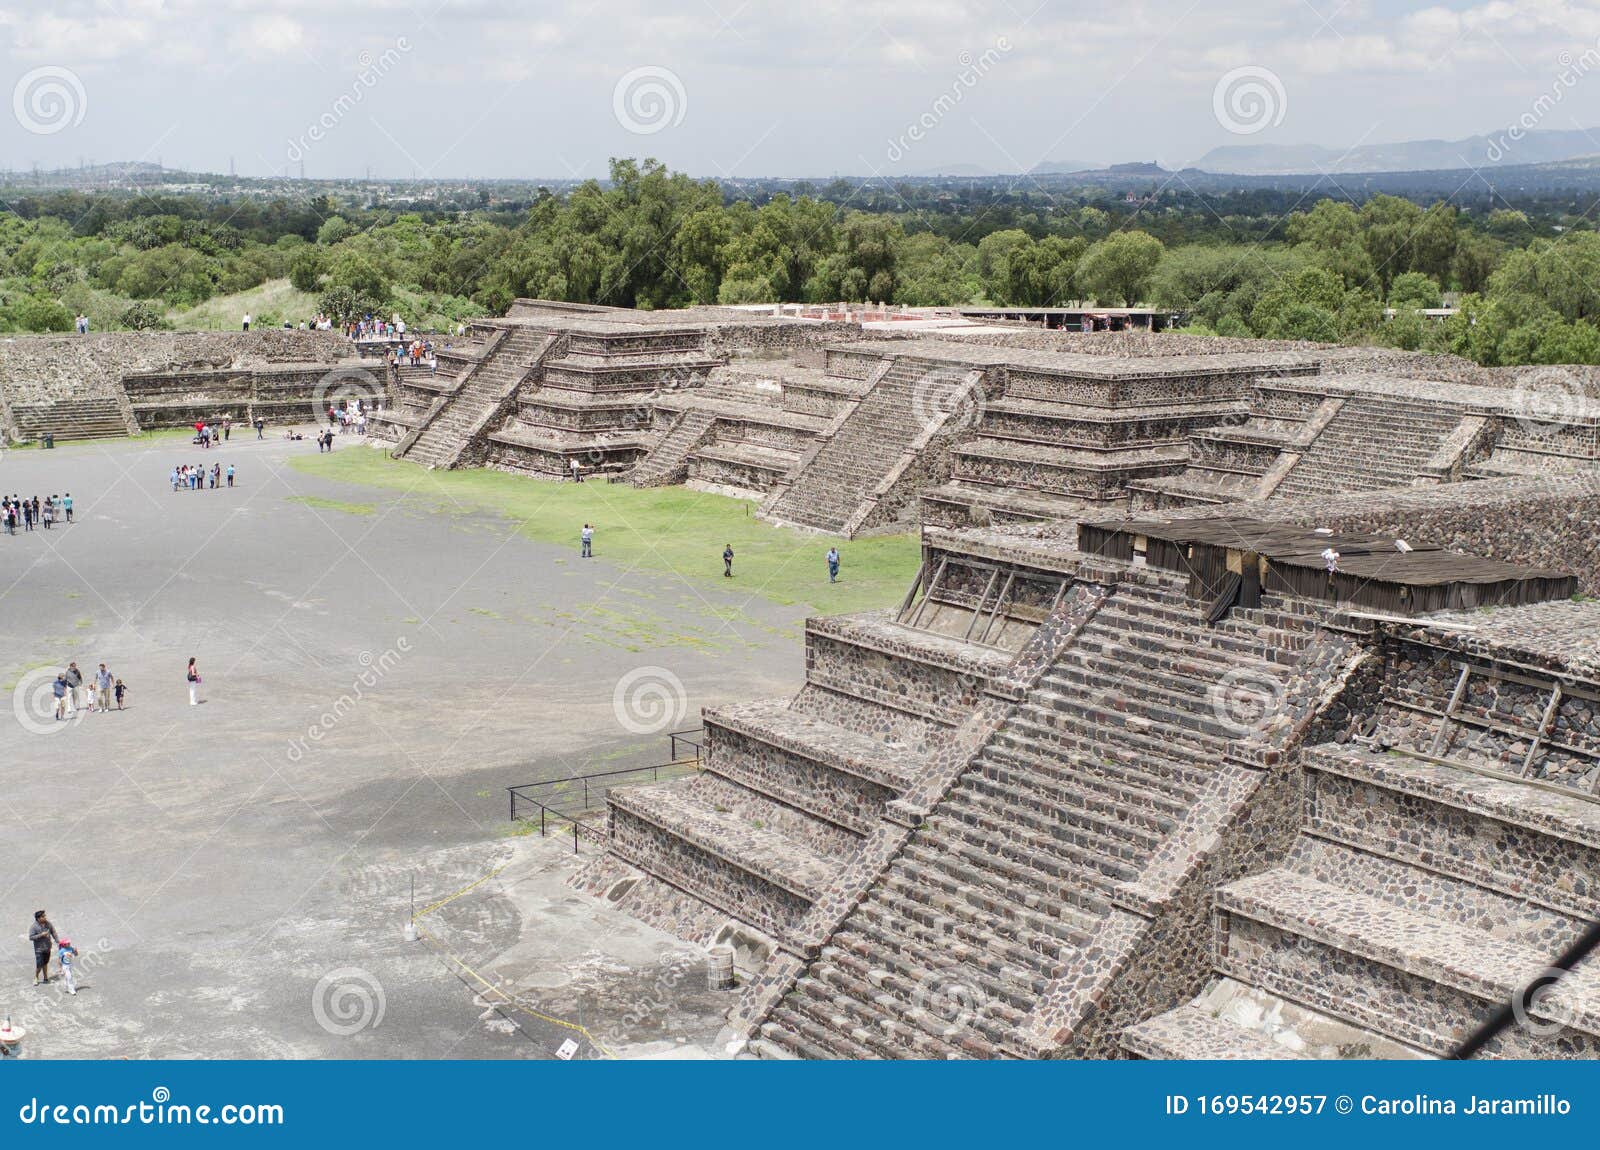 pyramid of the sun and square surrounded by platforms, in teotihuacan, mexico